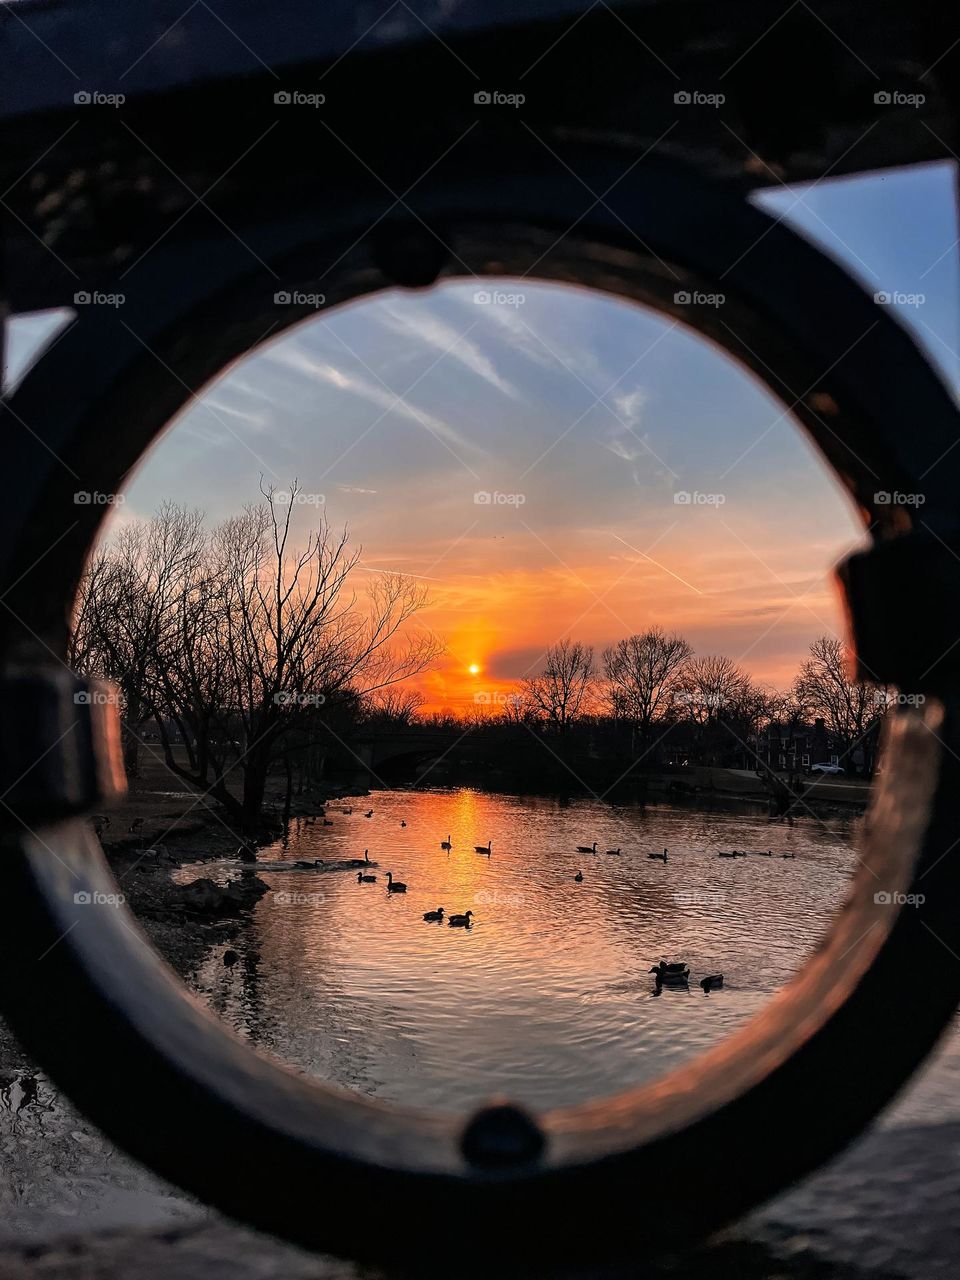 Lake river water duck wildlife no people phone photo pic picture sunset sunsetting through hole different interesting 